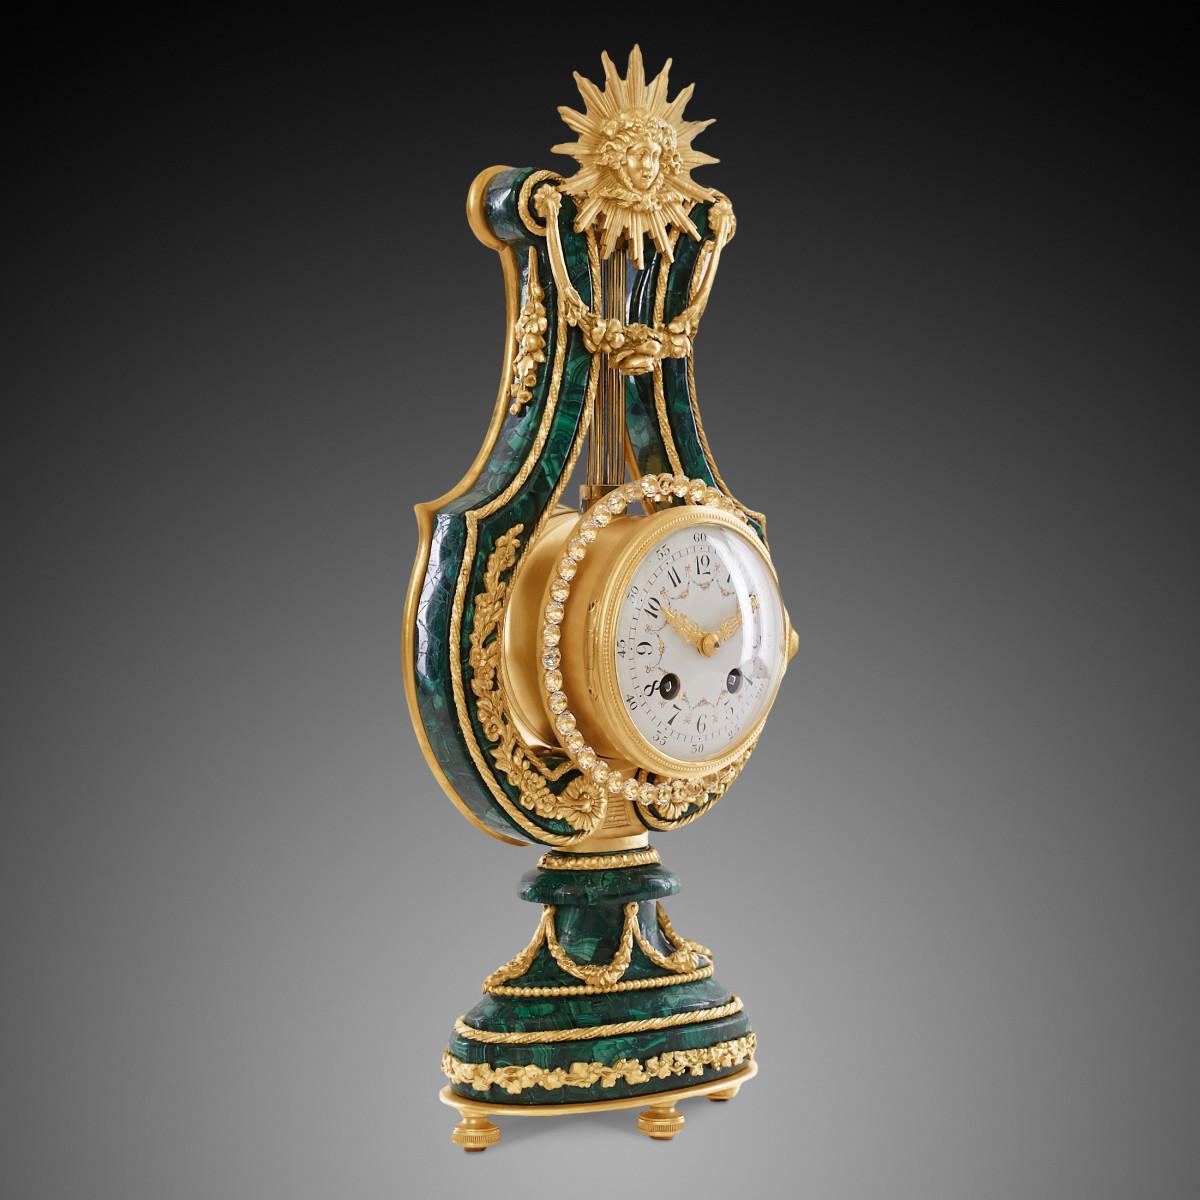 Gilt A of mantel clock in the style of Louis XVI, the 19th century.